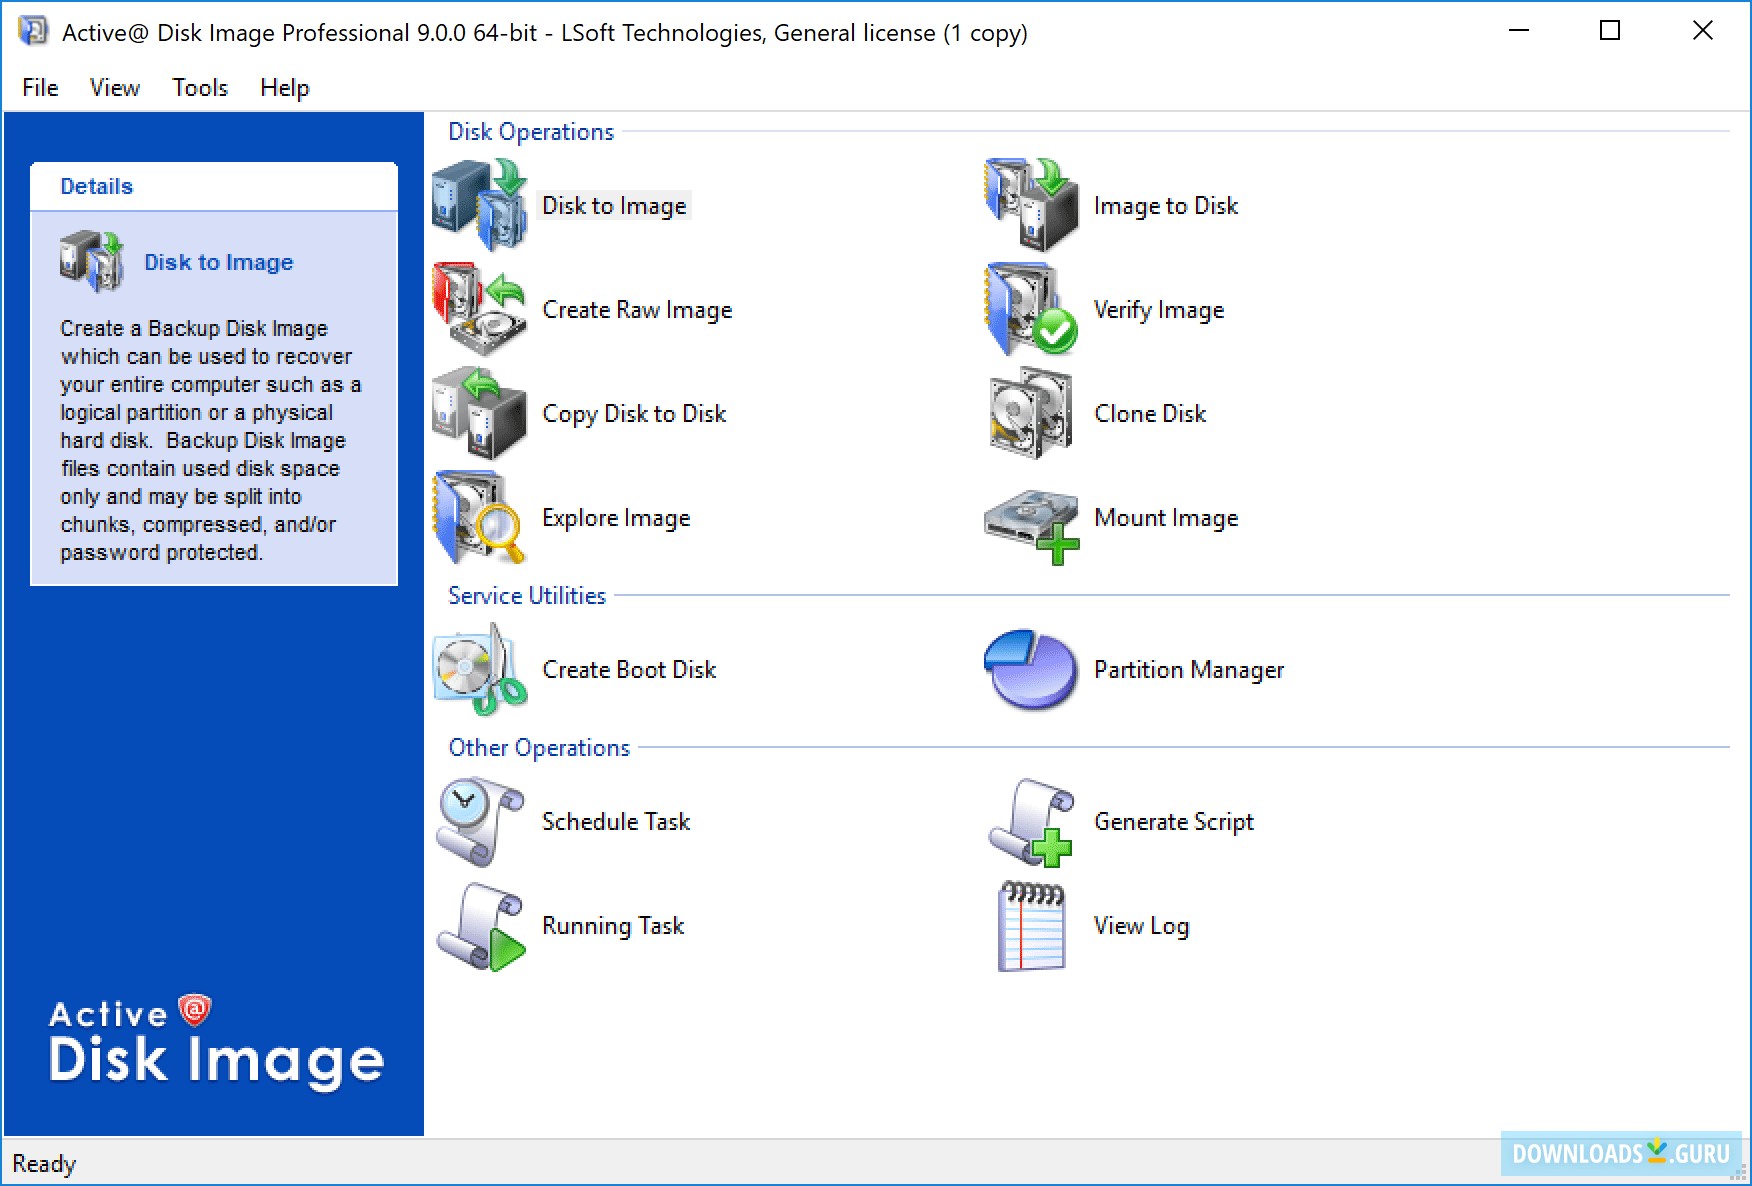 win64 disk imager download for windows 10